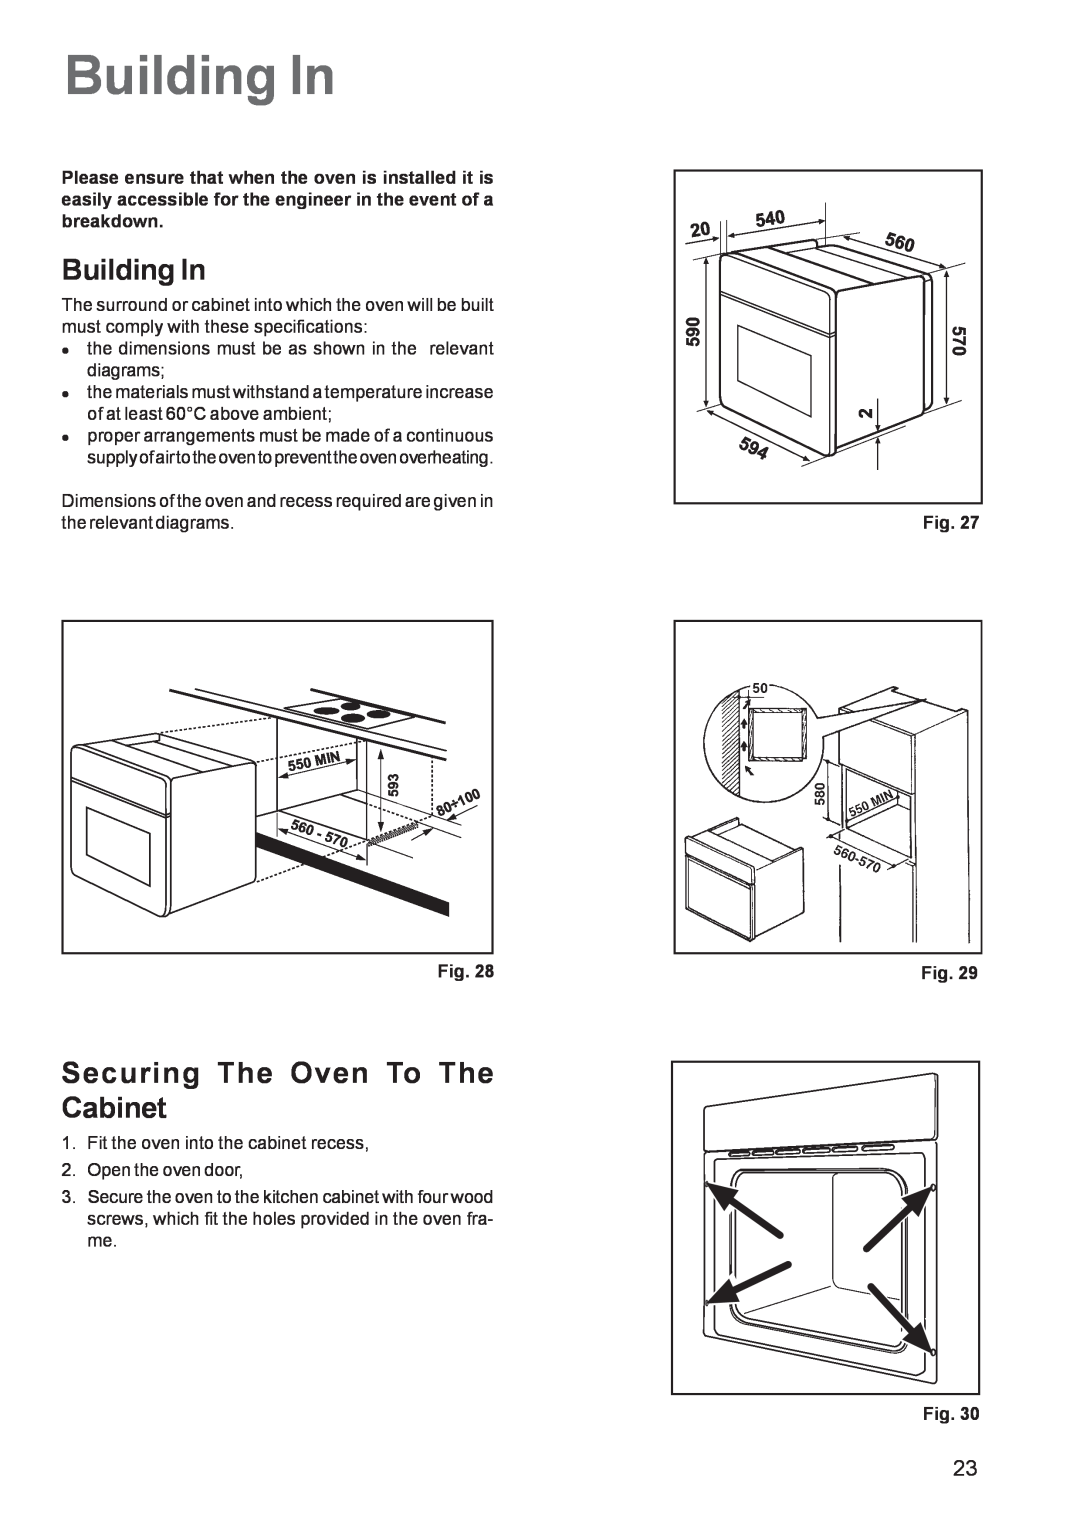 Zanussi ZBS 963 manual Building In, Securing The Oven To The Cabinet 